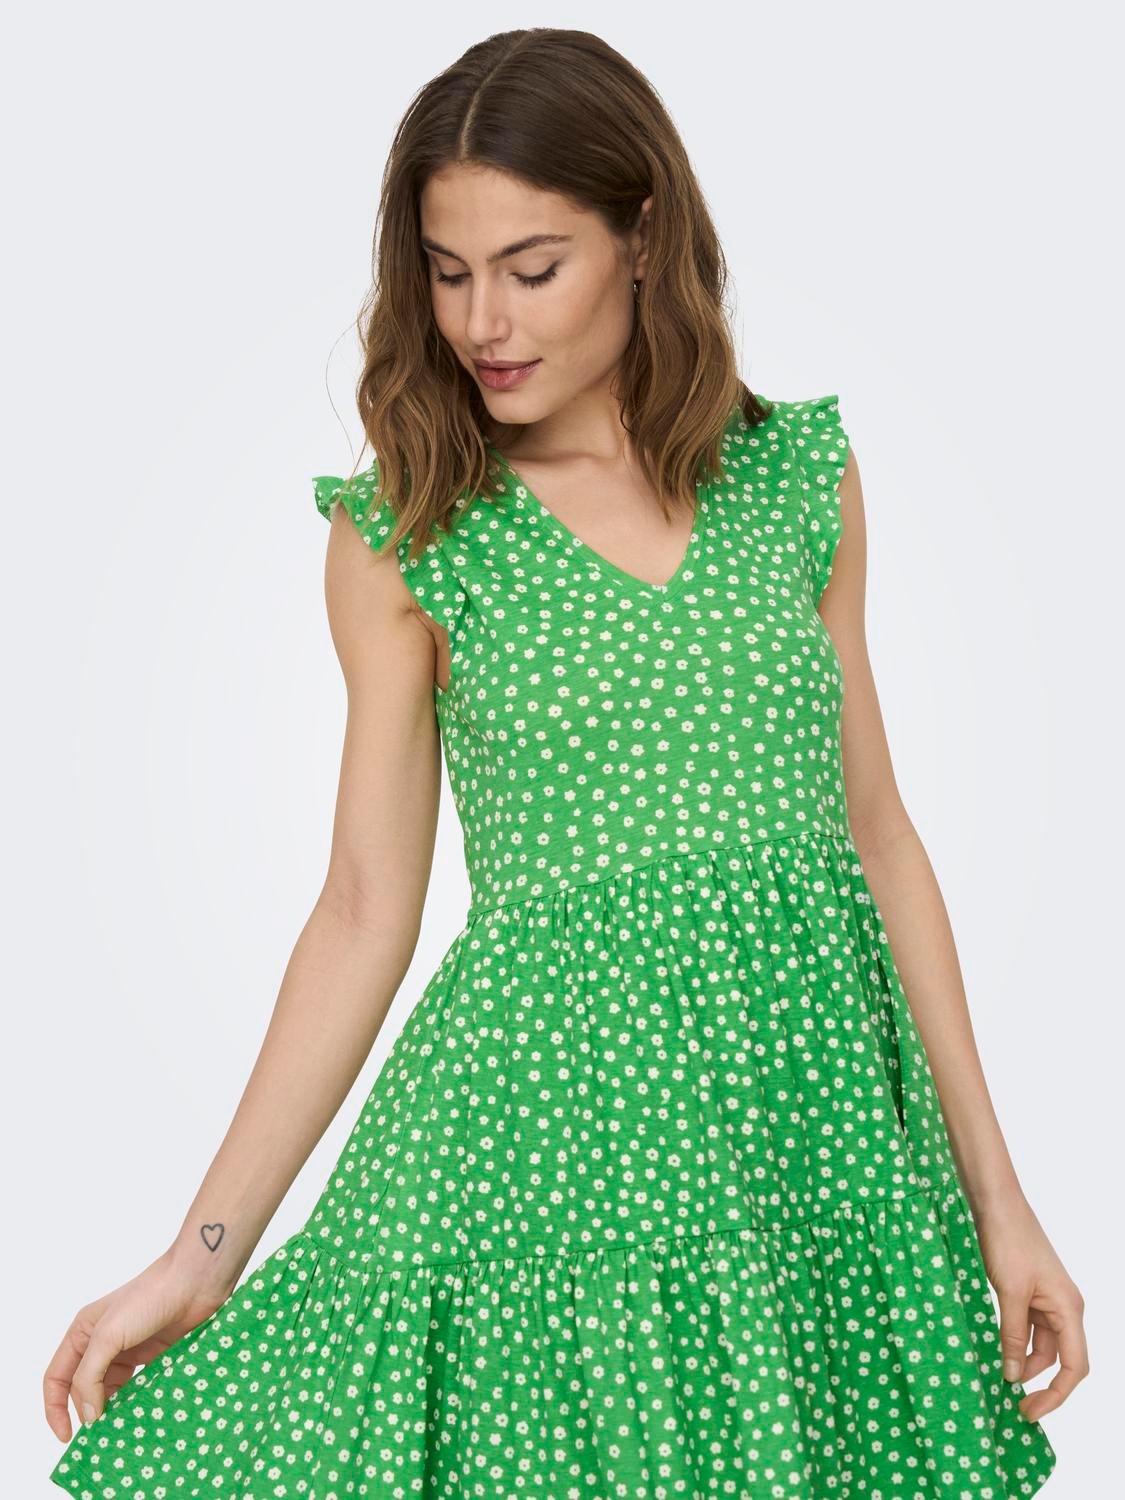 ONLY Mini dress with frills -Kelly Green - 15226992